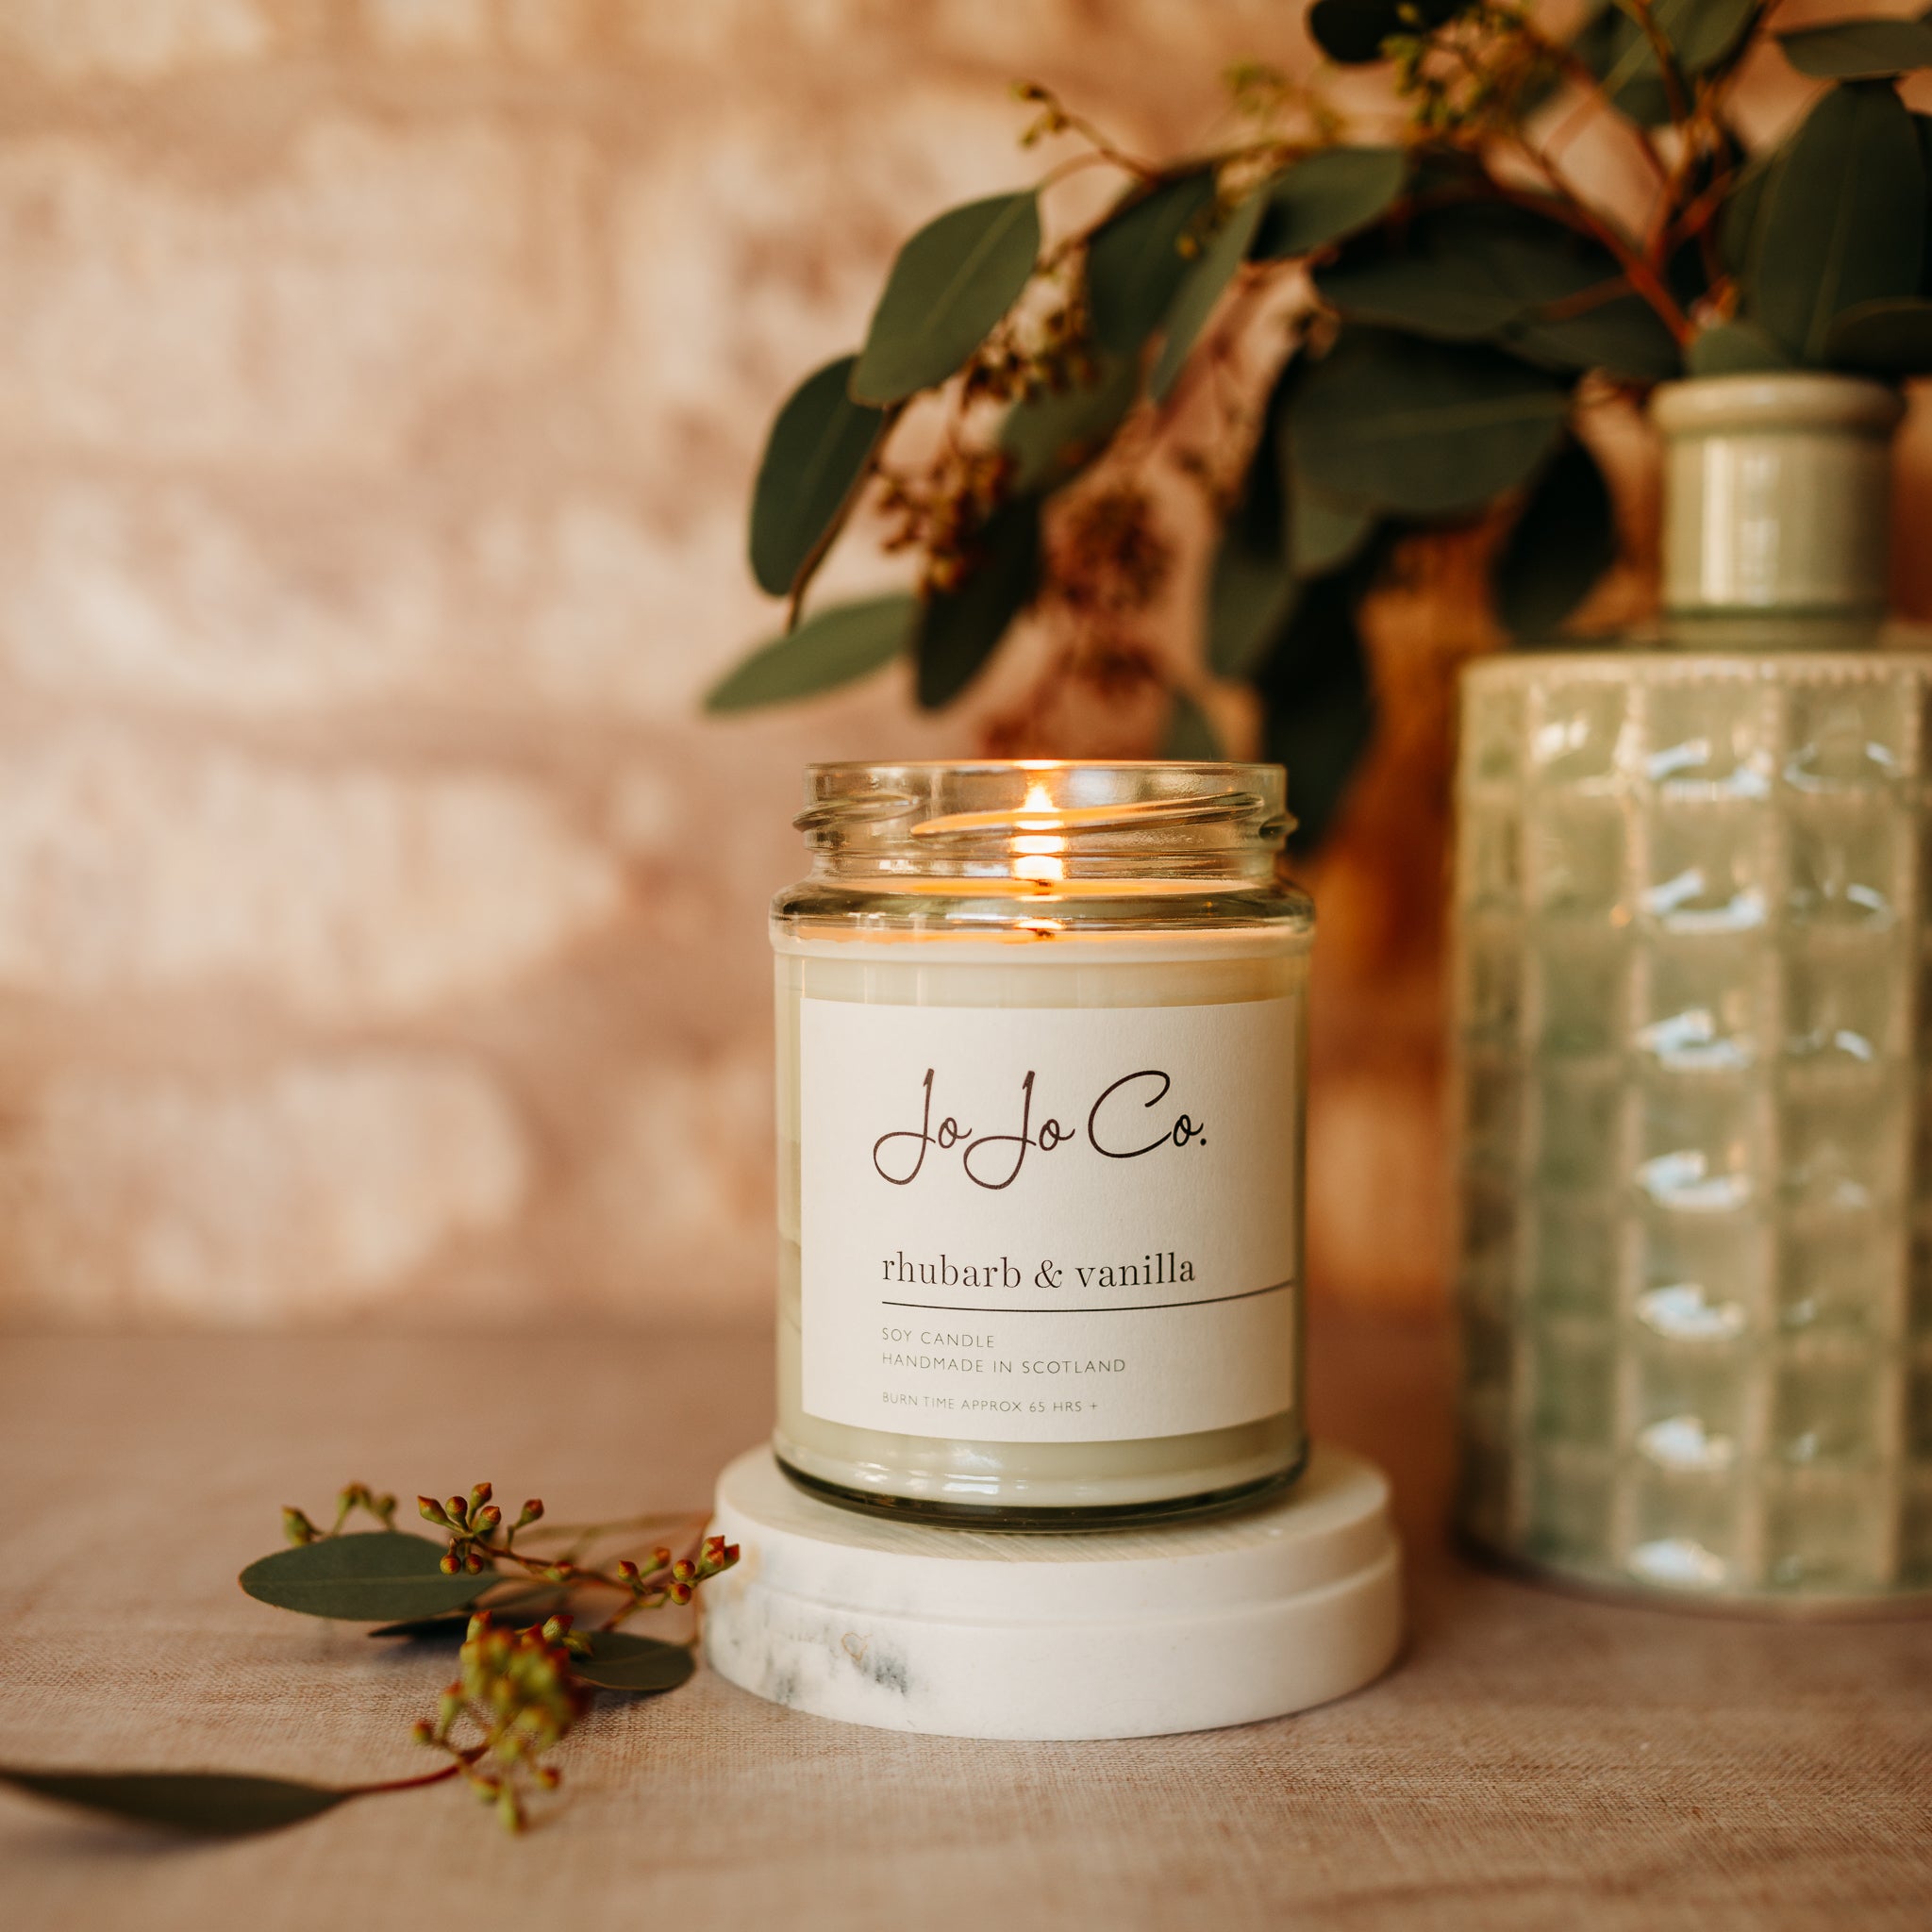 A lit JoJo Co 65 hour Rhubarb and Vanilla candle in a glass jar with a vase and foliage